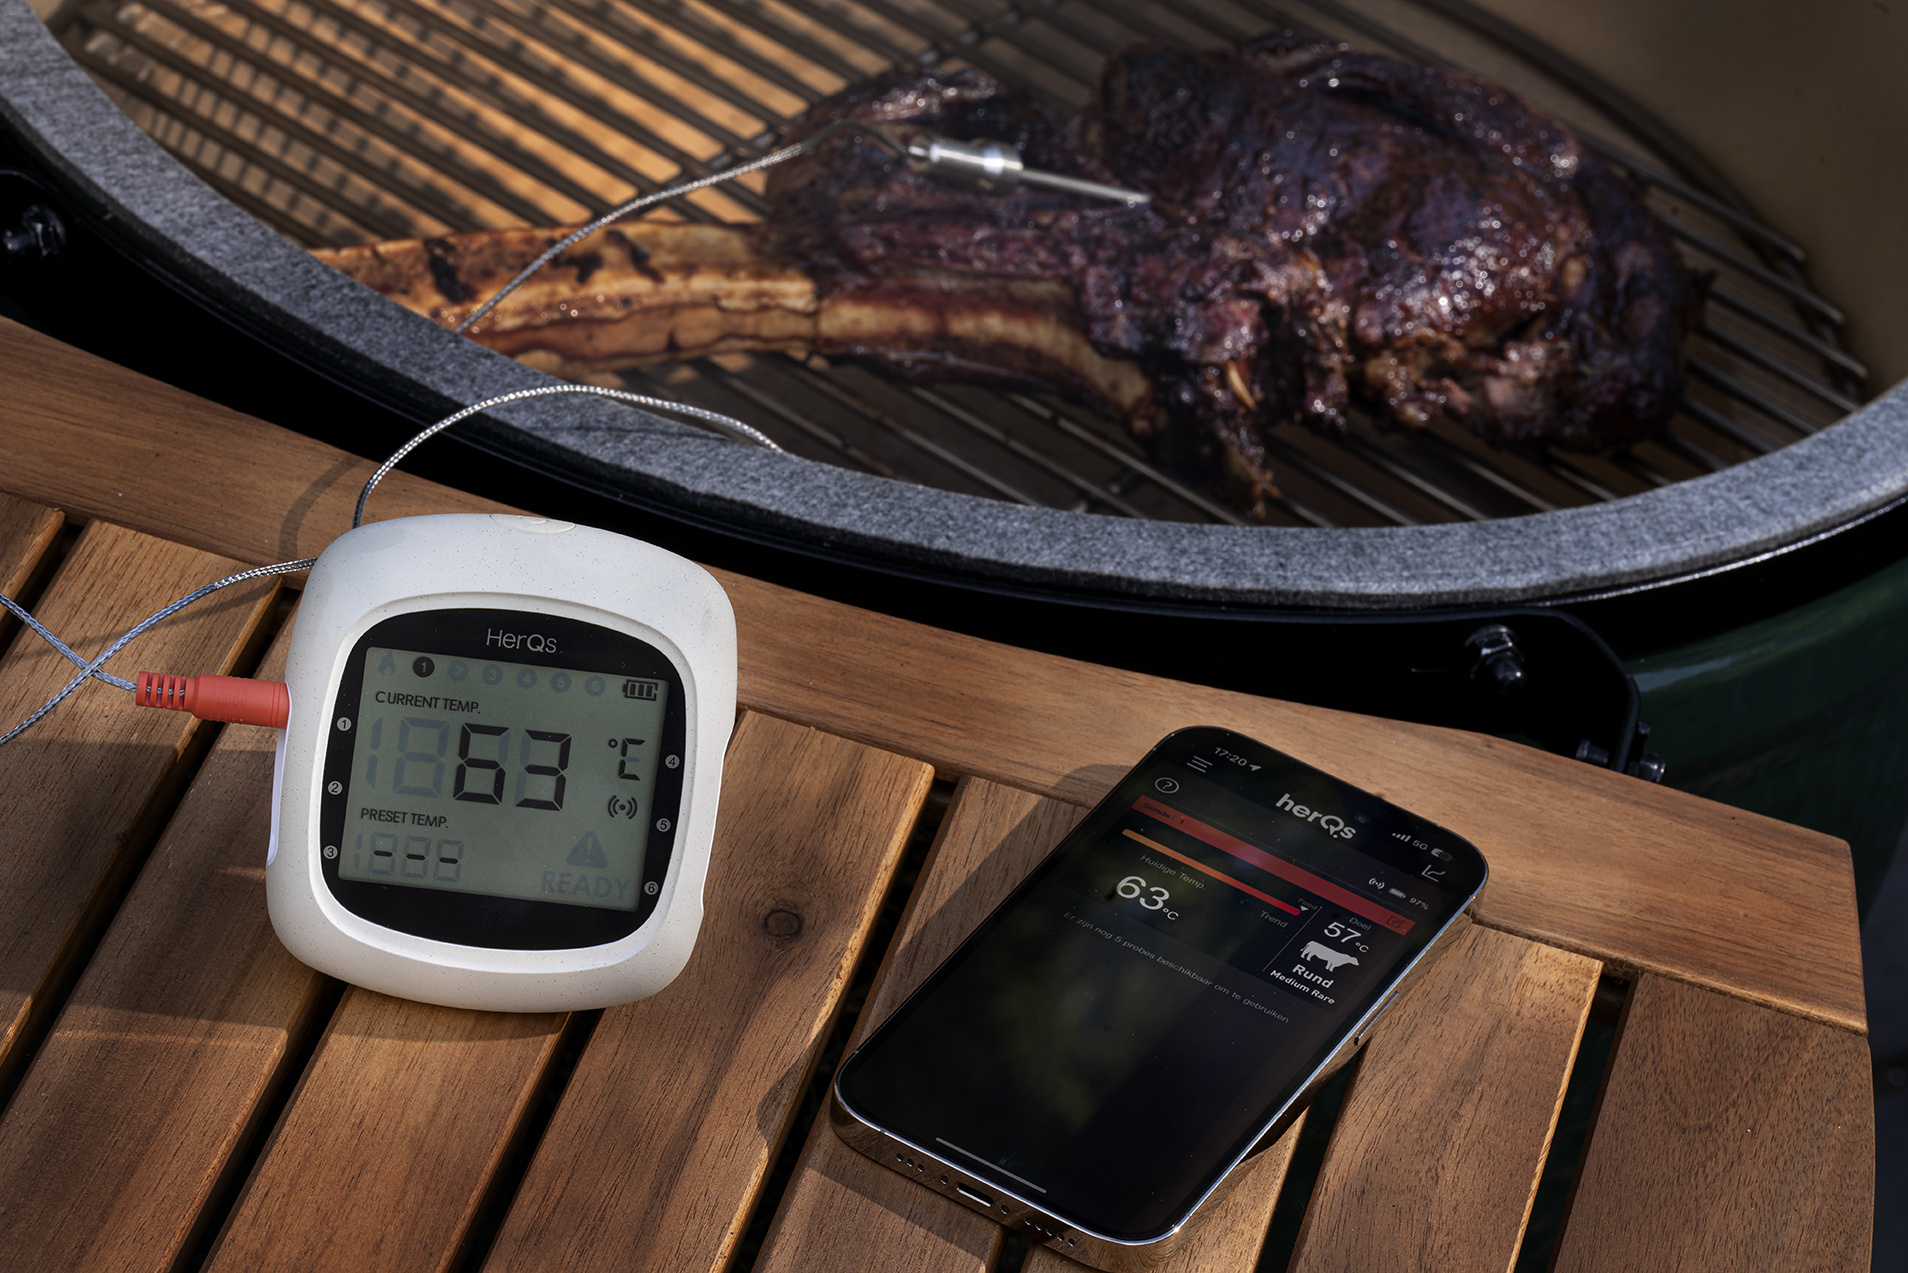 Bluetooth Meat Grill Thermometer with 4 Probes with Alarm & Timer HBN -  BN-LINK